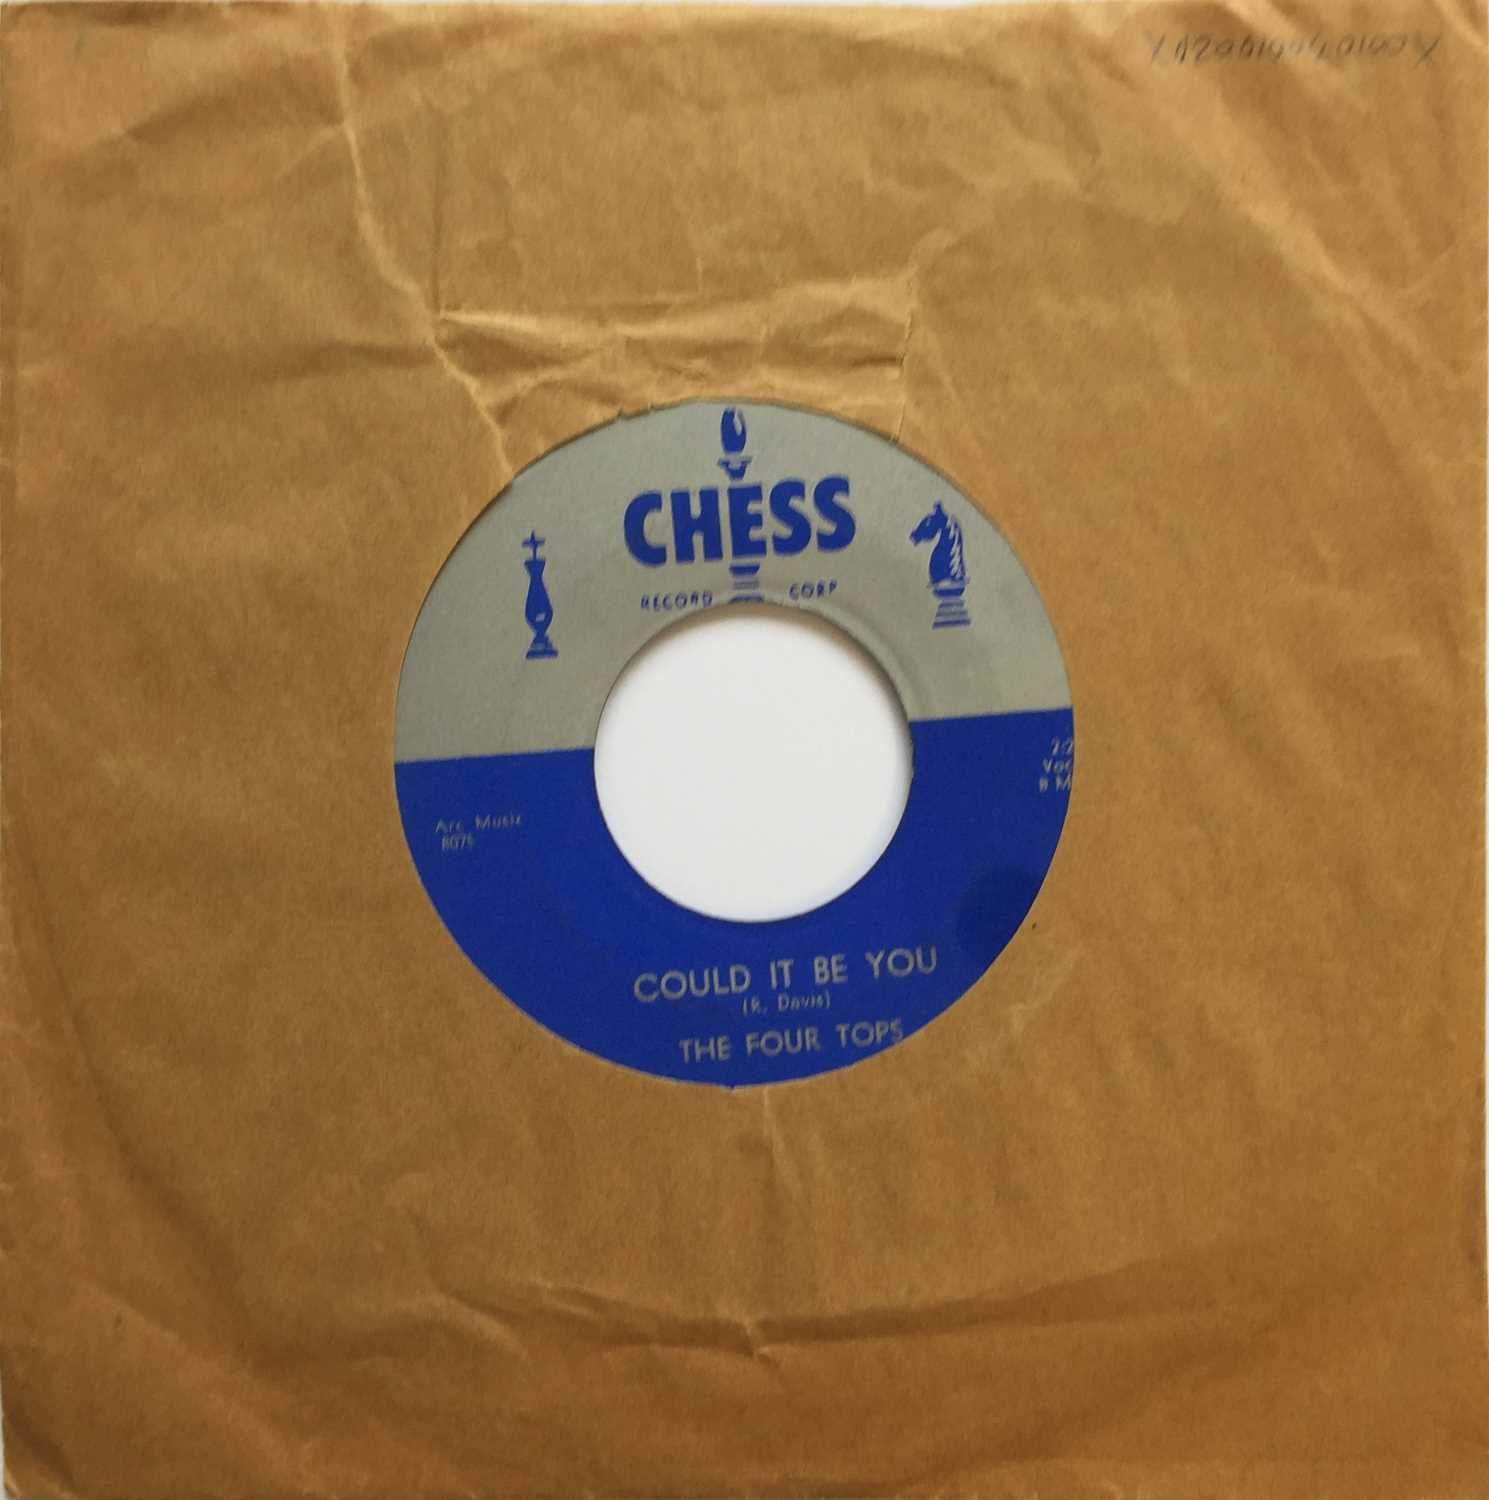 Lot 159 - THE FOUR TOPS - KISS ME BABY/ COULD IT BE YOU 7" (CHESS 1623)